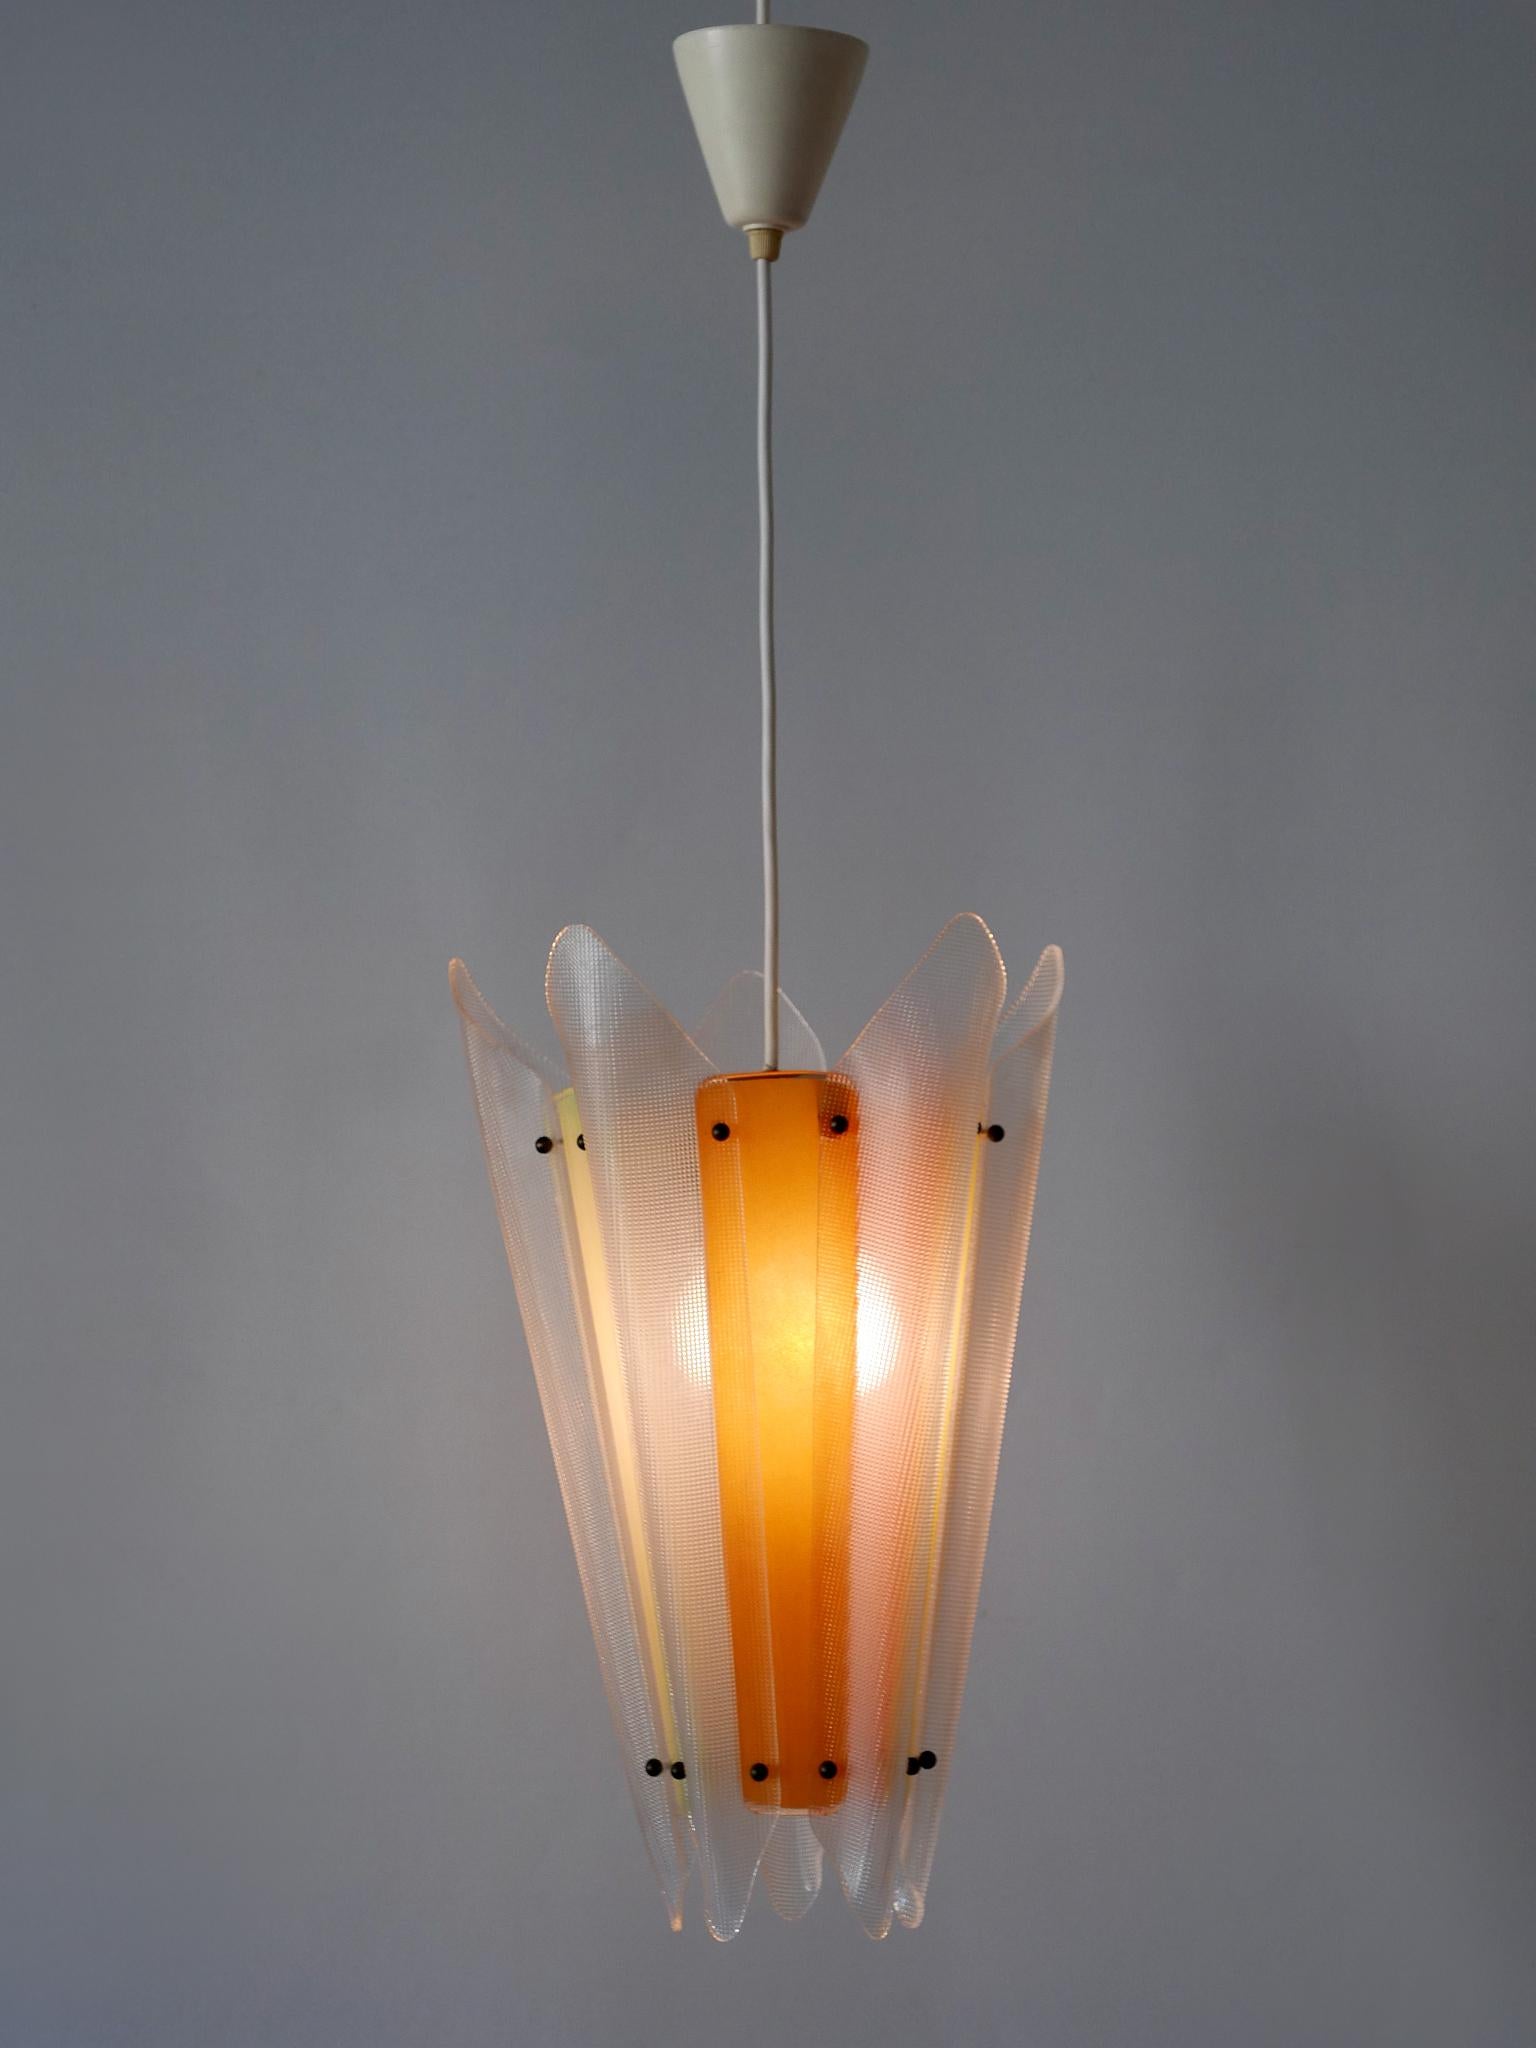 Rare Mid-Century Modern Multi-Colored Lucite Pendant Lamp Germany 1960s For Sale 7